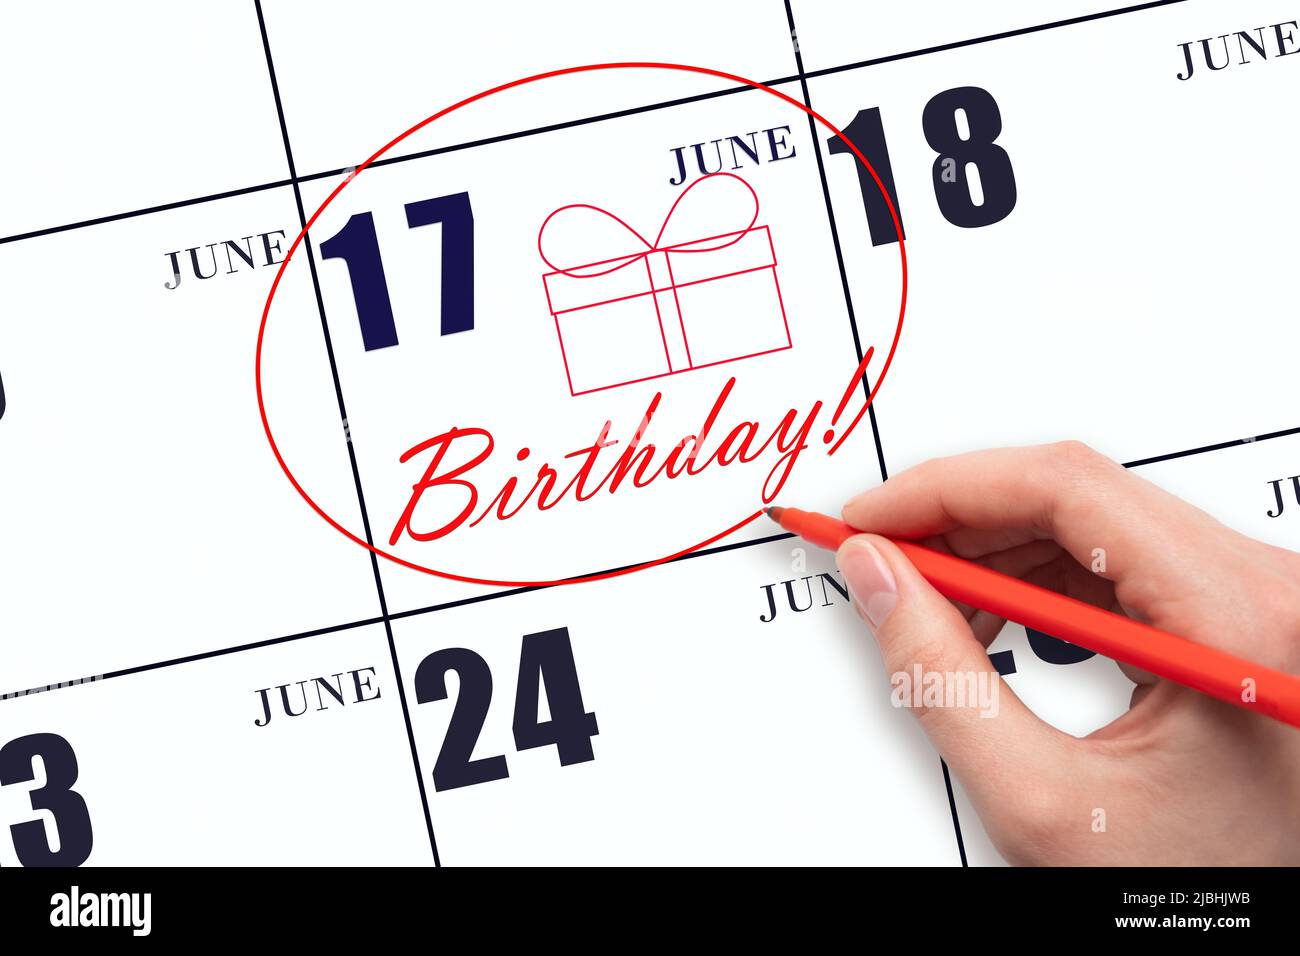 17th day of June. The hand circles the date on the calendar 17 June, draws a gift box and writes the text Birthday. Holiday. Summer month, day of the Stock Photo - Alamy